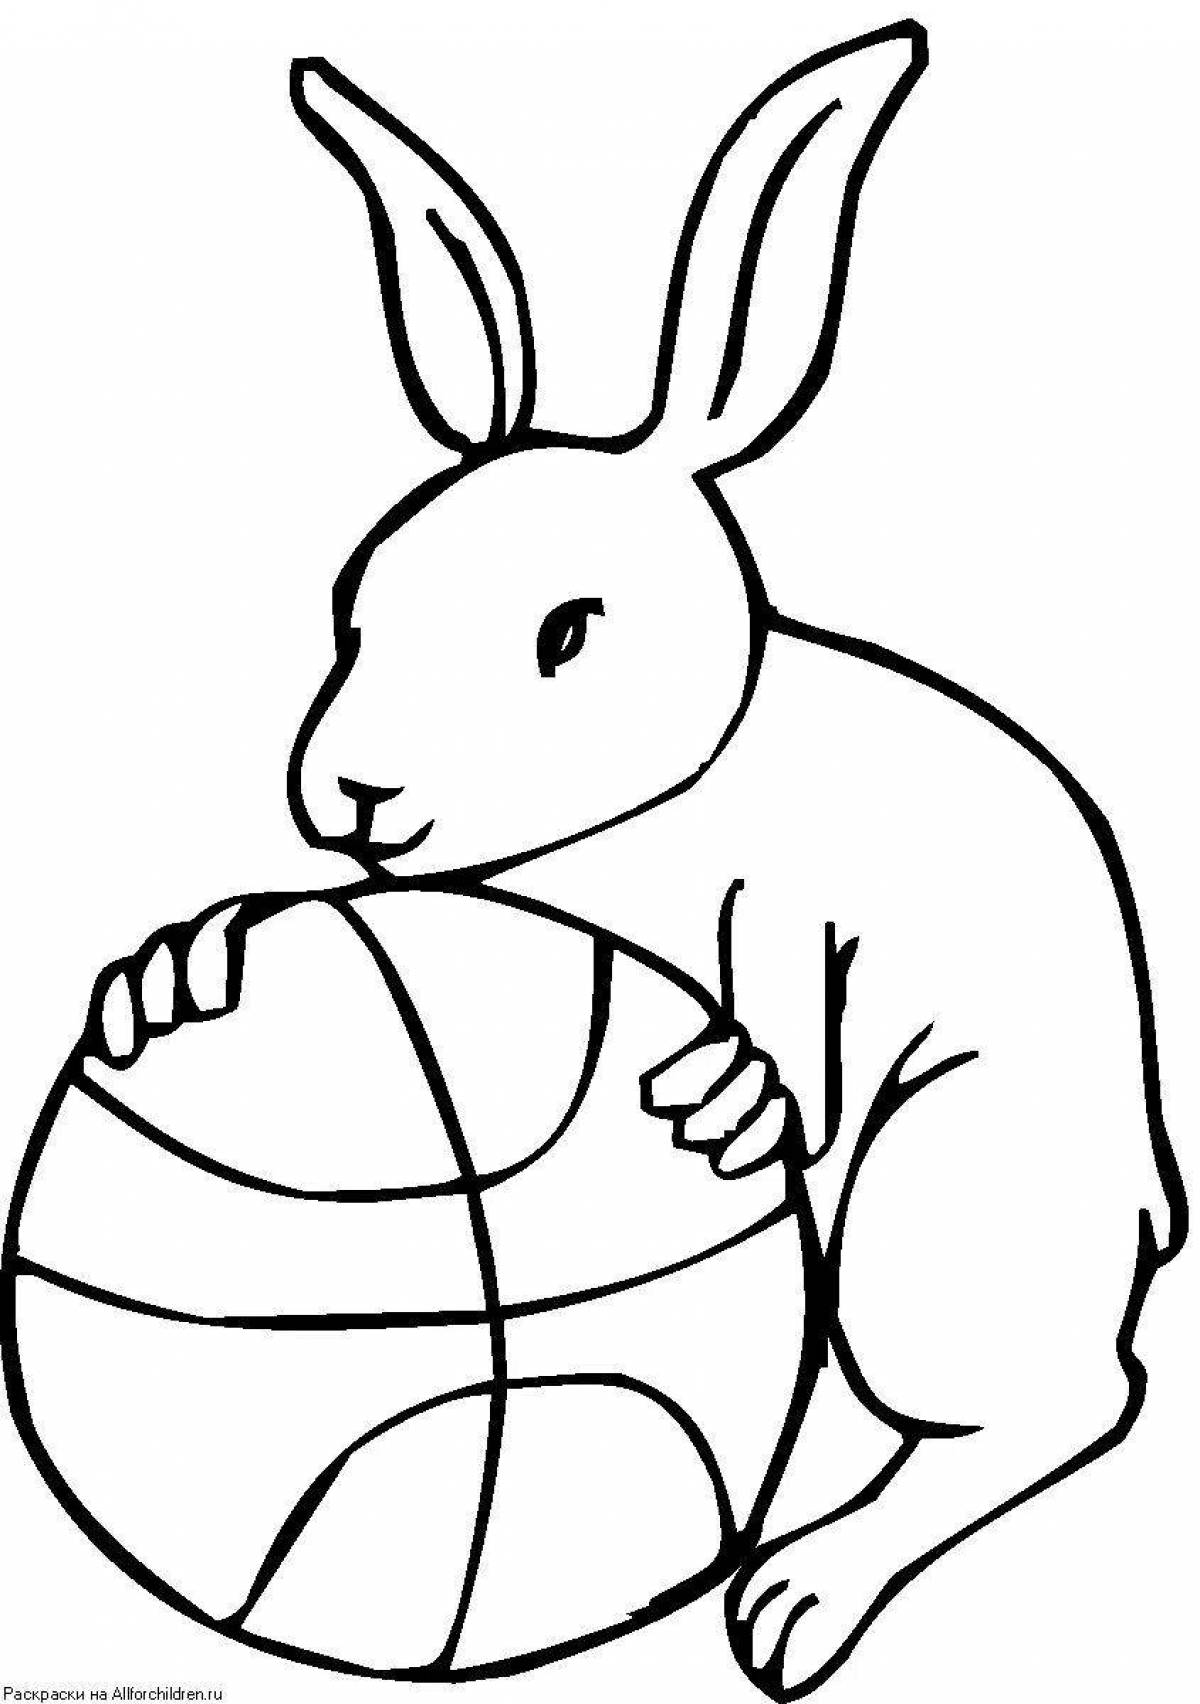 Trendy bunny coloring book for 6-7 year olds